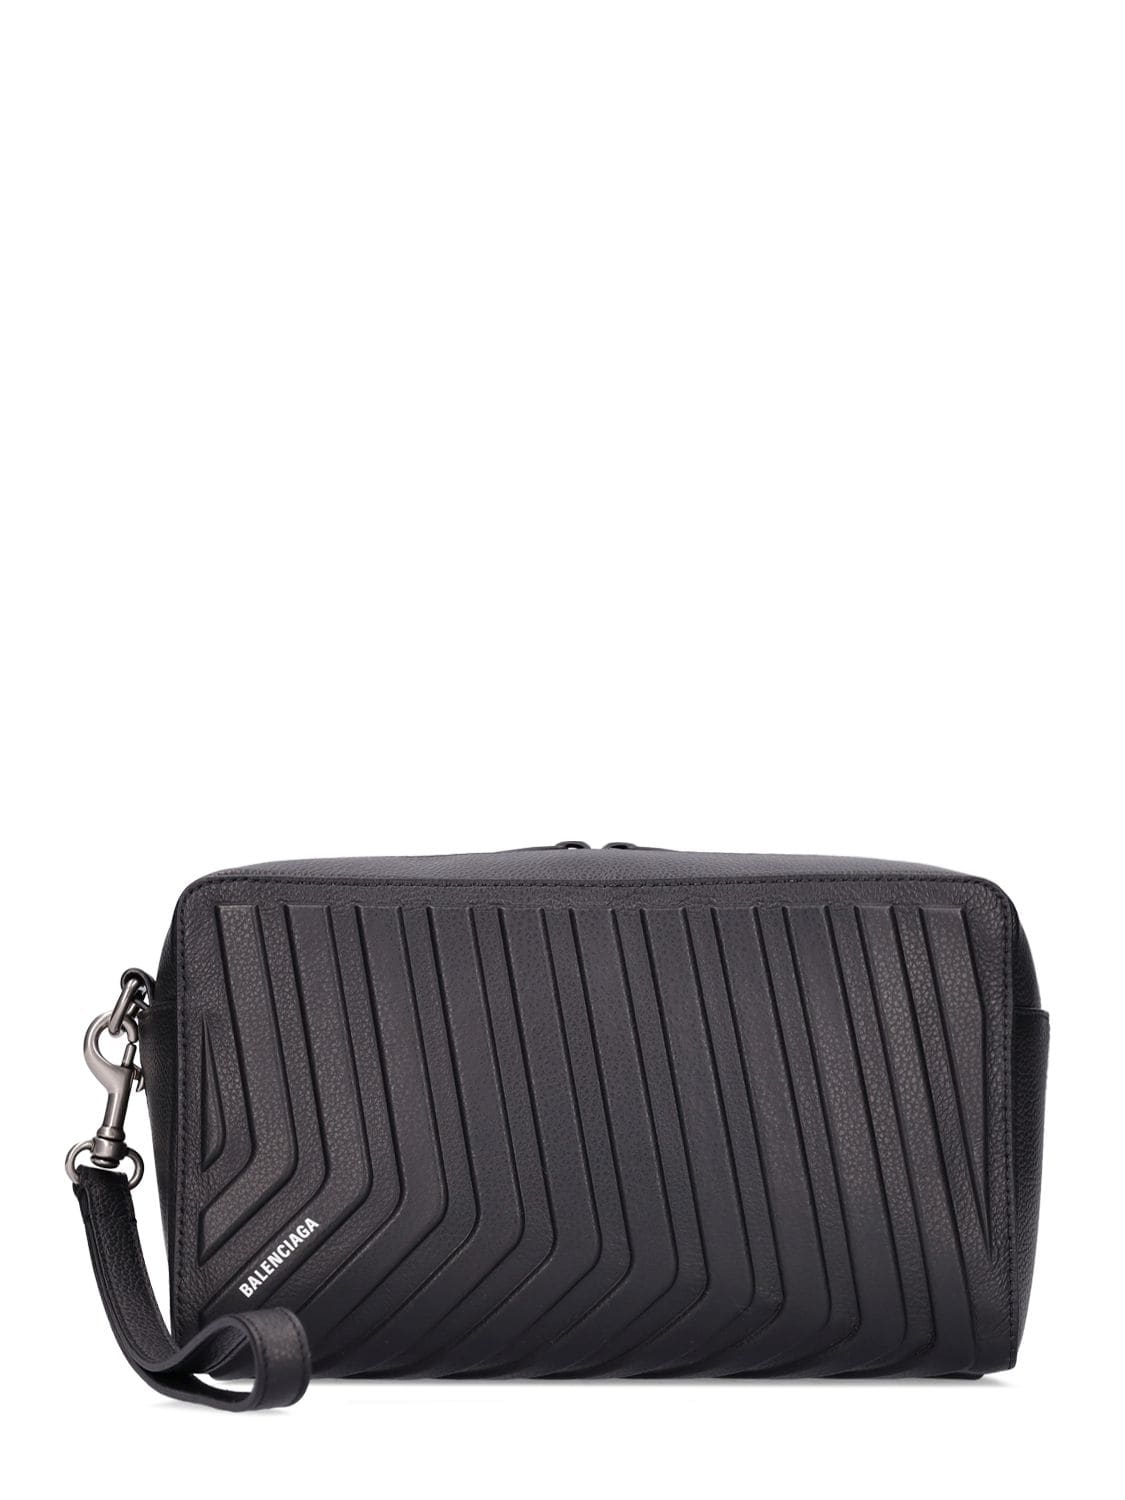 Car Embossed Leather Toiletry Bag